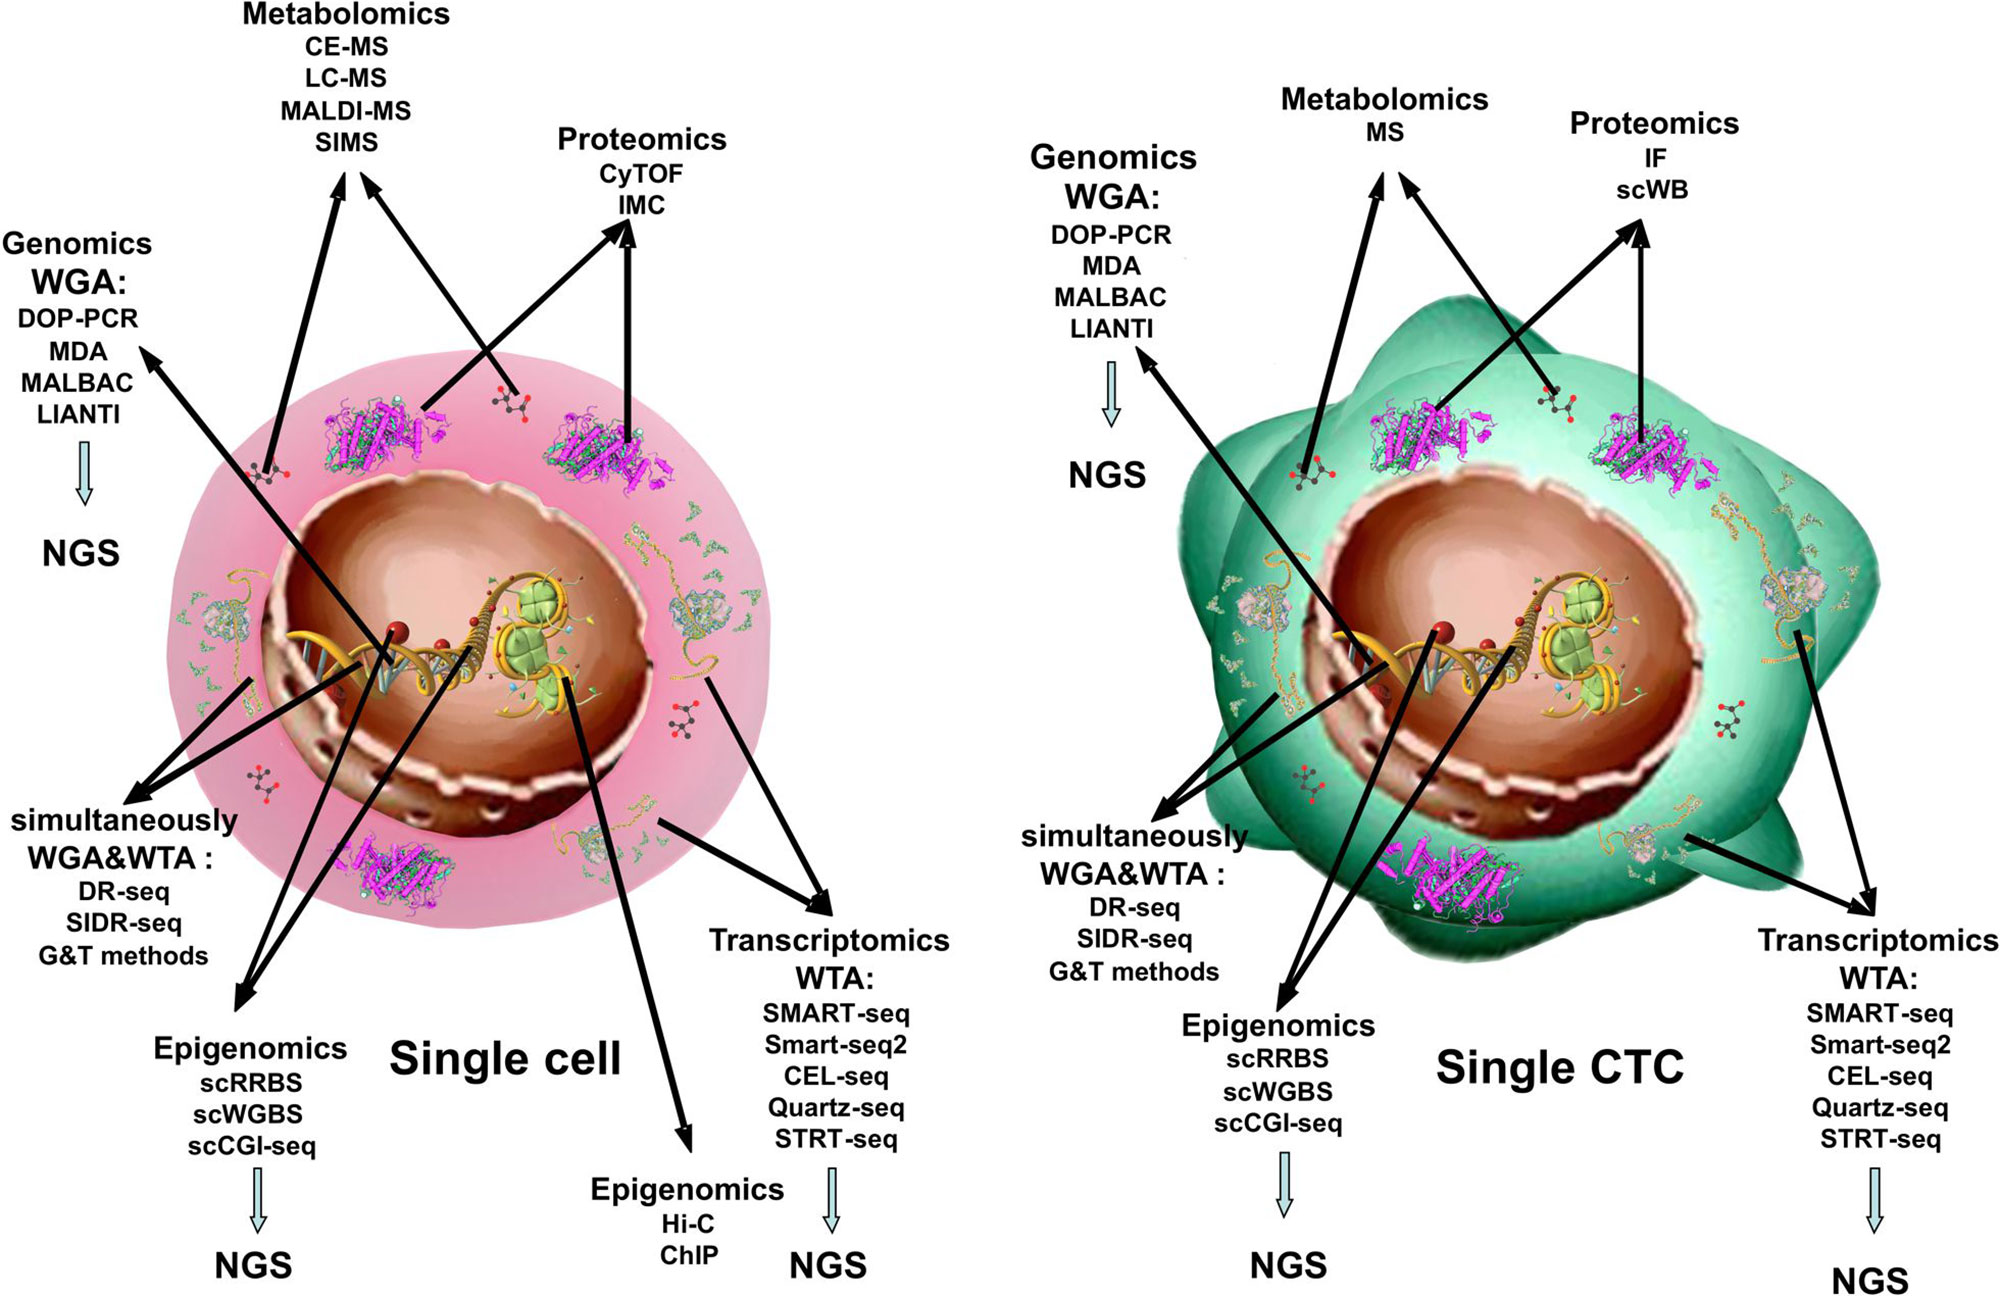 Single cell